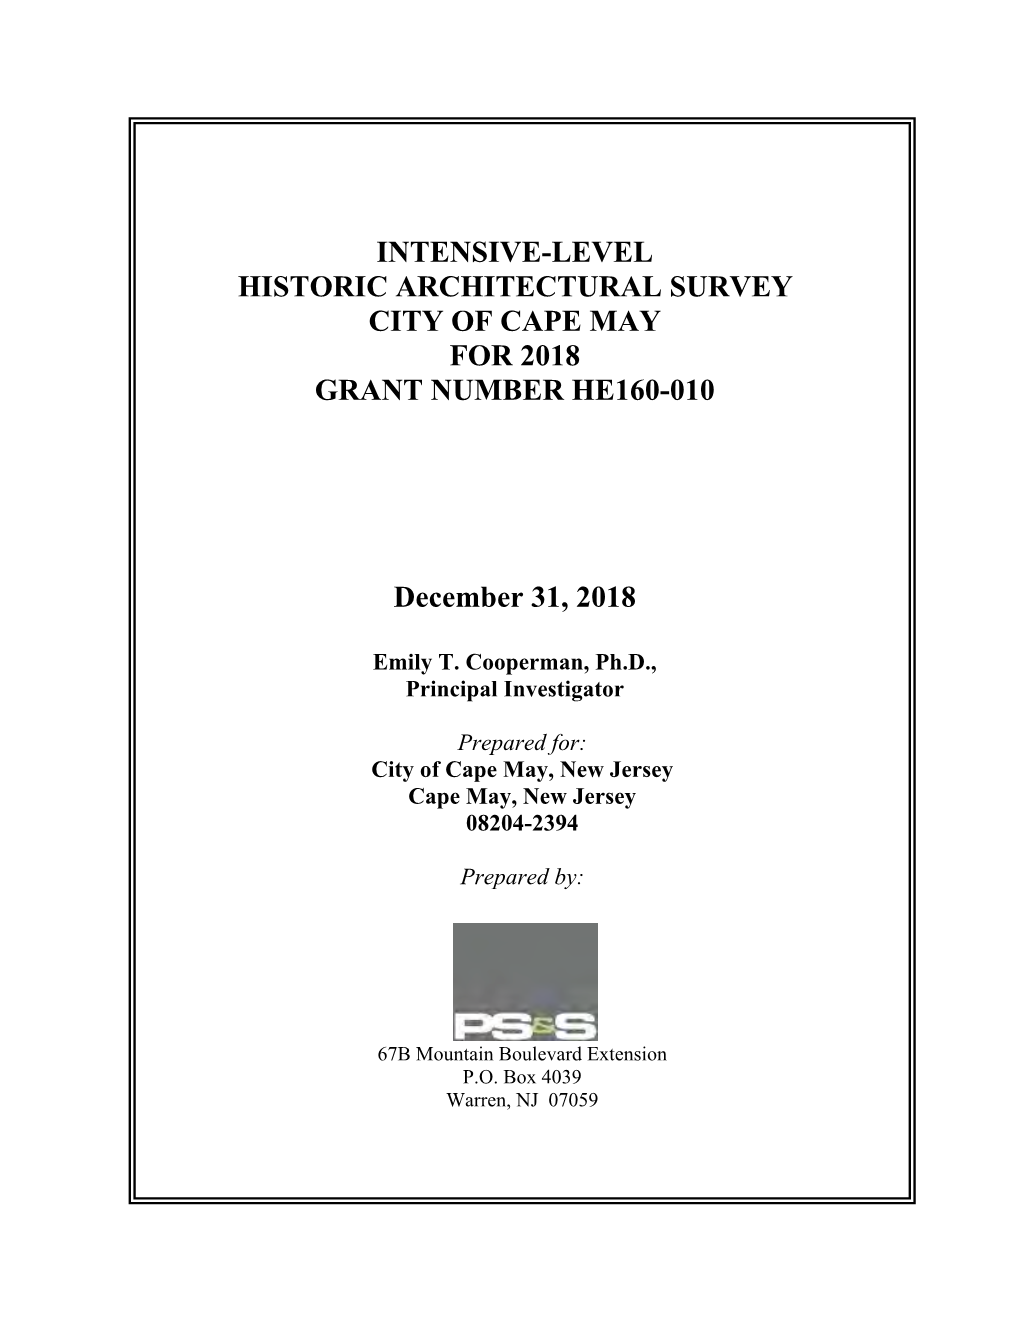 Intensive-Level Historic Architectural Survey City of Cape May for 2018 Grant Number He160-010